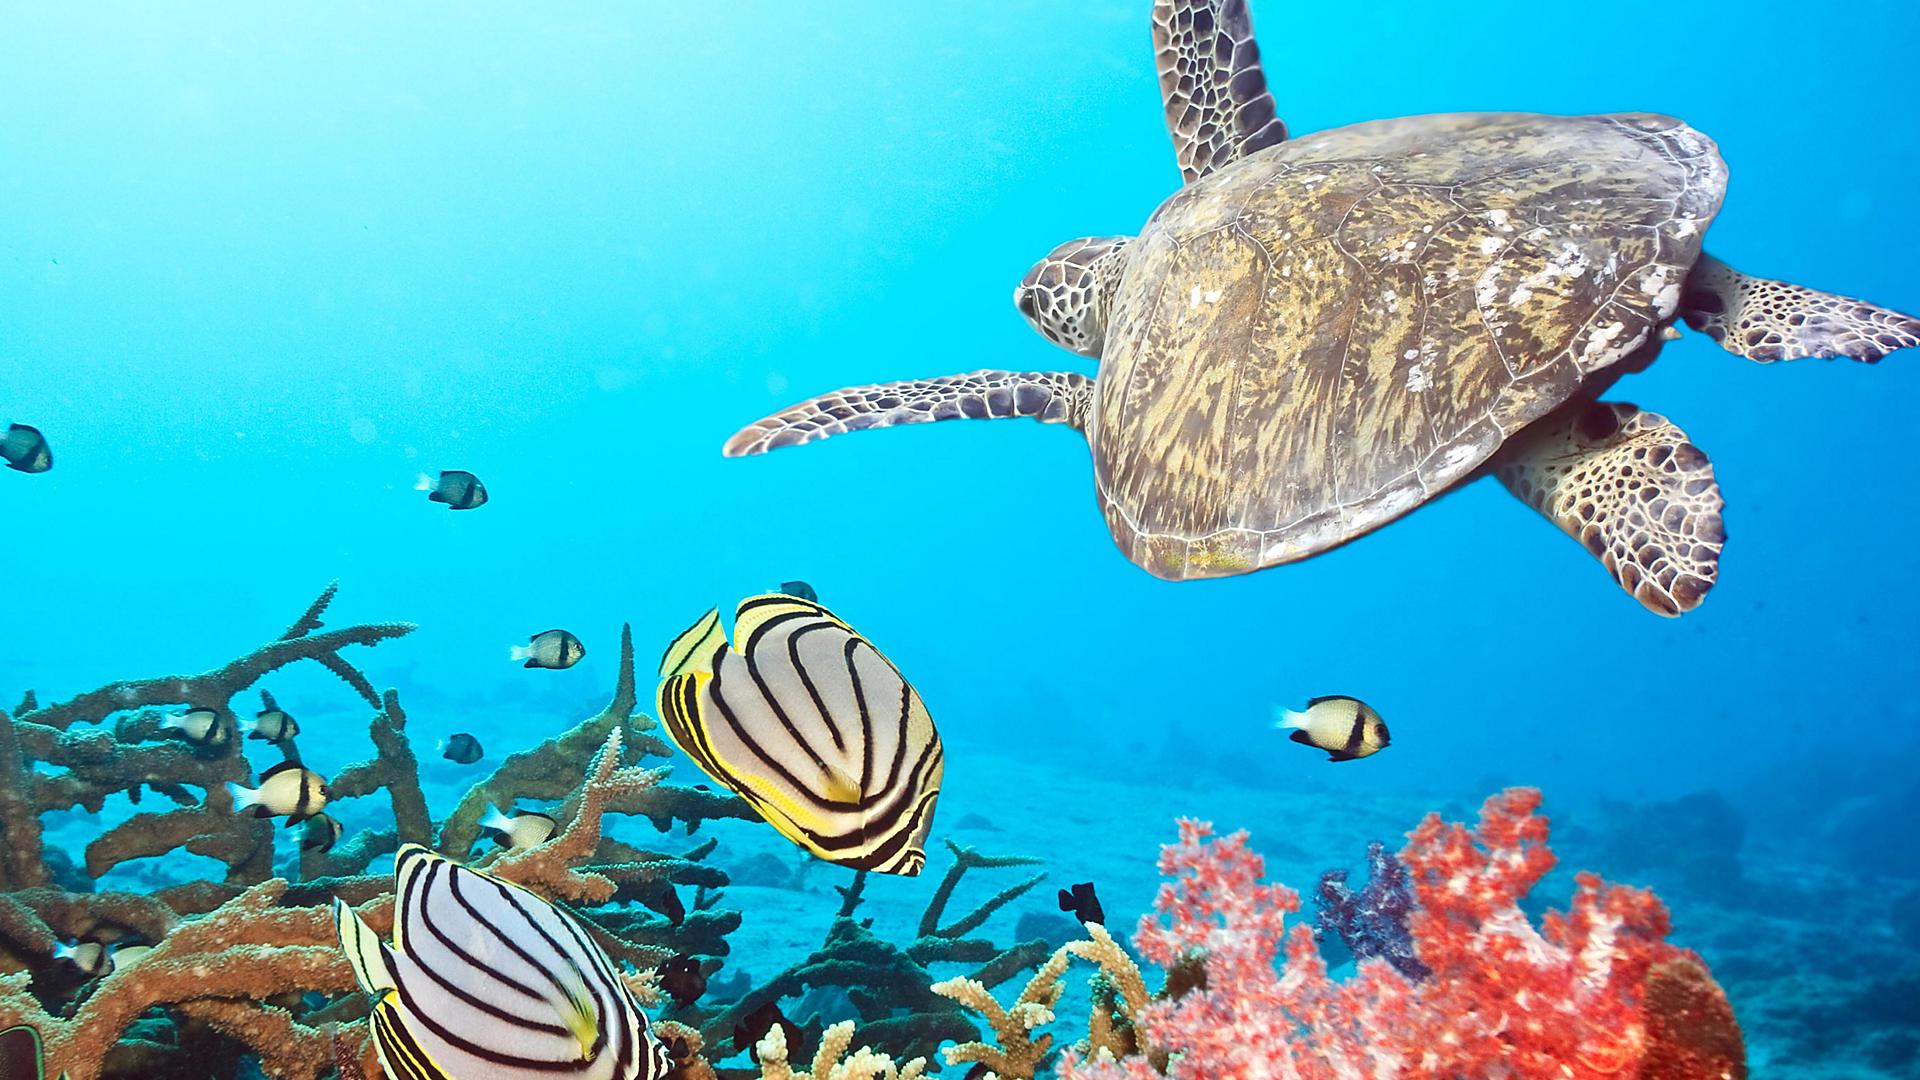 butterfly-fishes-and-turtle-underwater-landscape